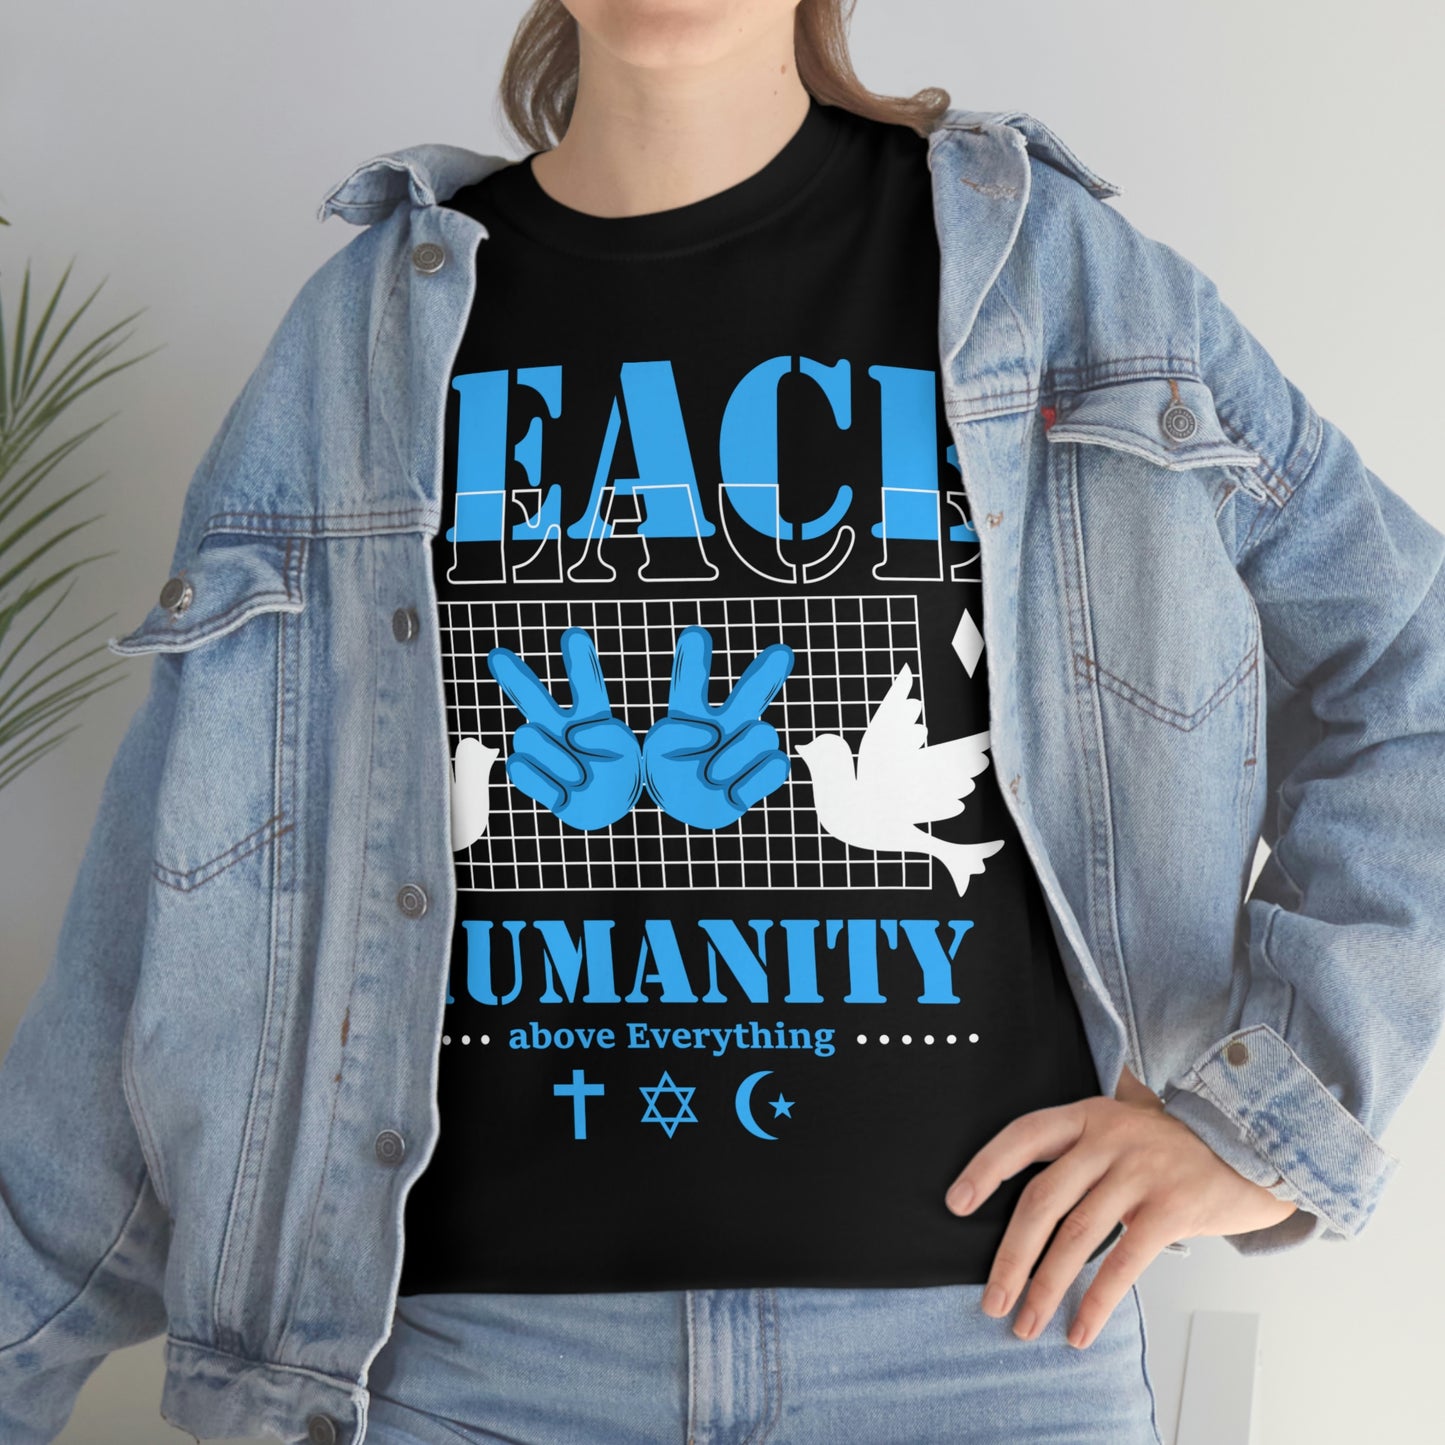 Peace and Humanity Tee